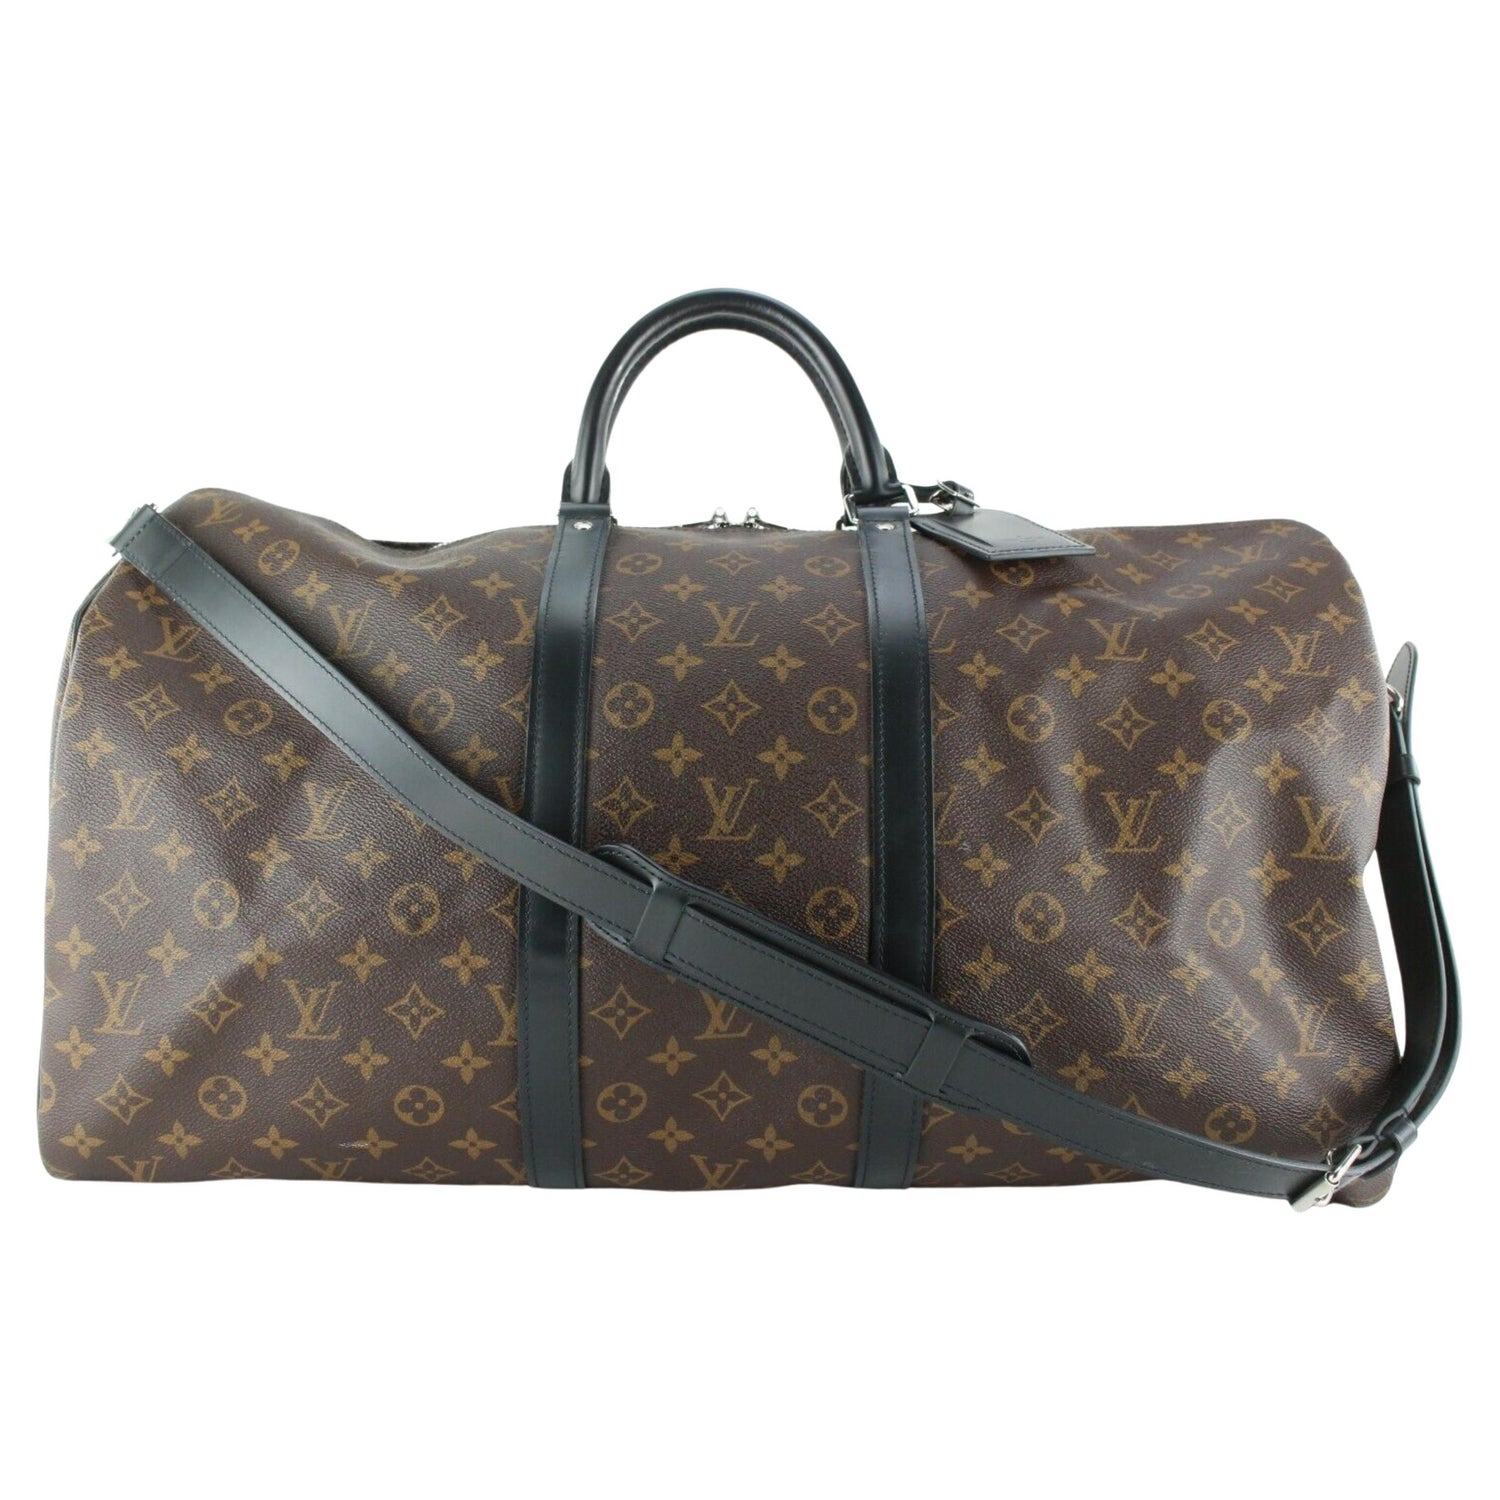 Louis Vuitton 1994 pre-owned Keepall 60 duffle bag